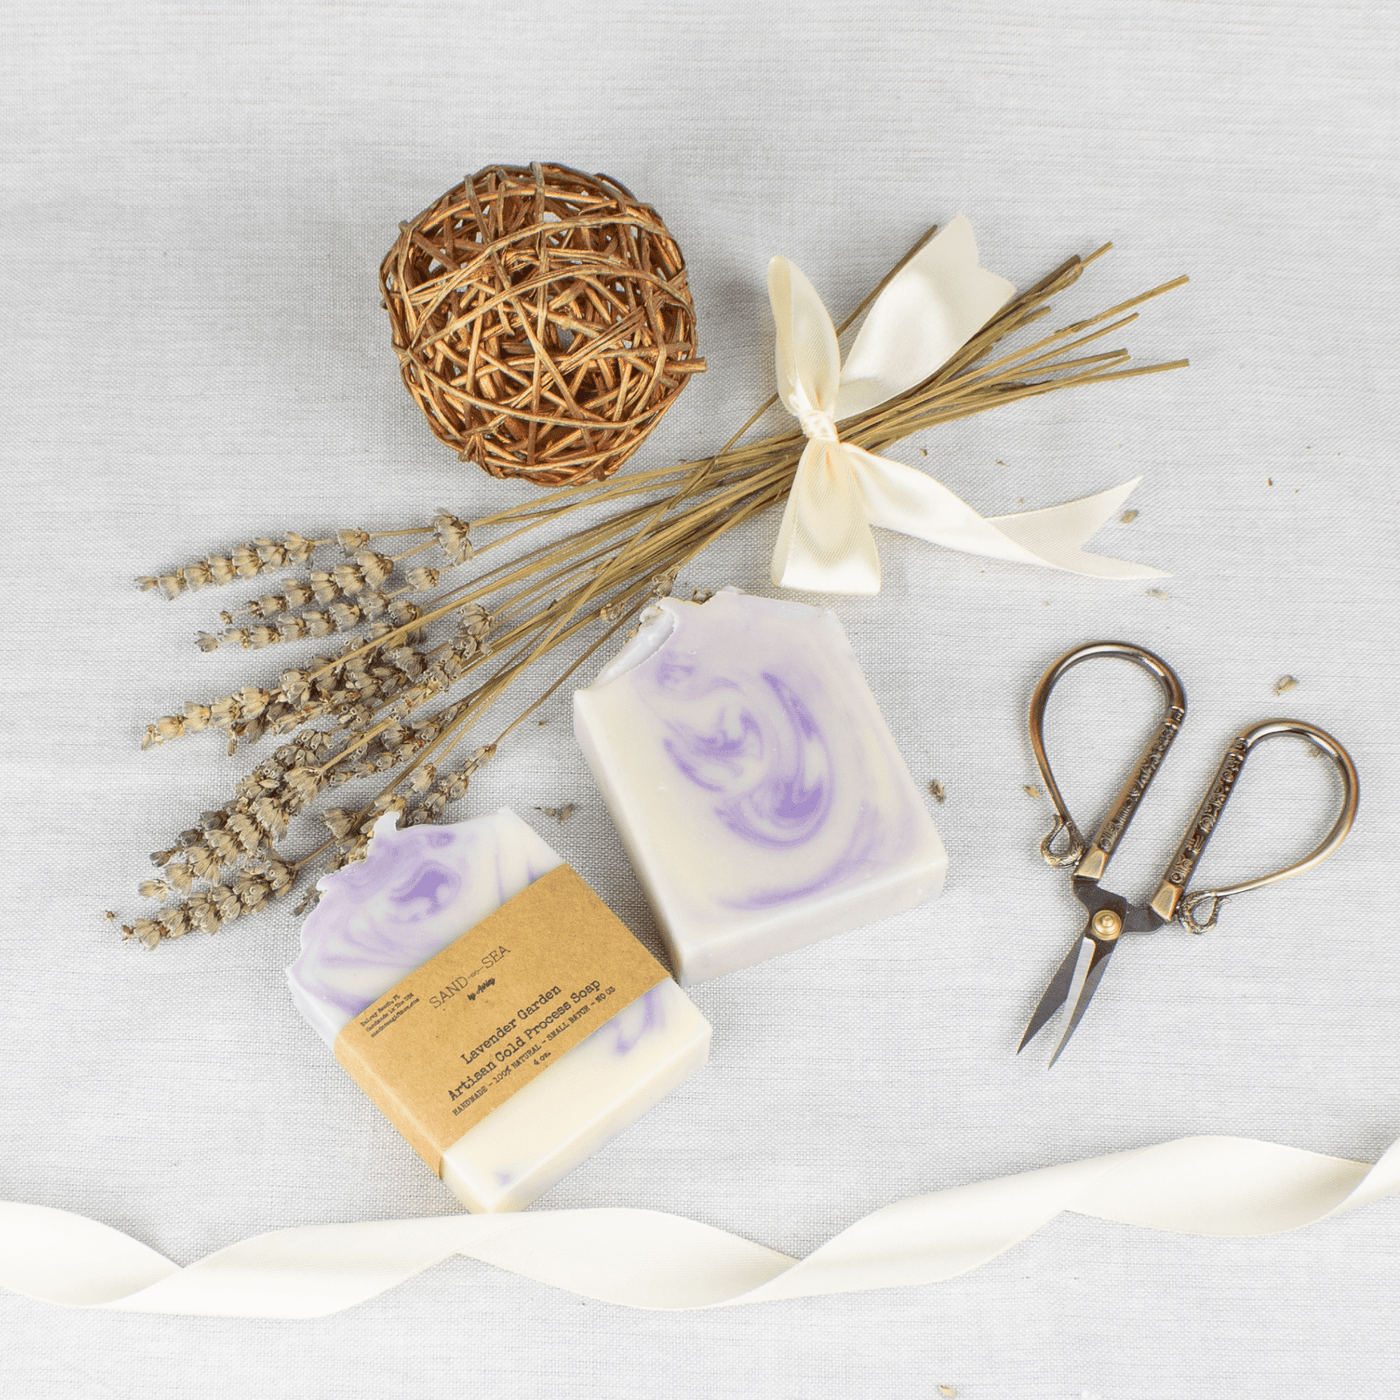 Best Mom in The World - Mothers Day Gift Basket - Handmade Natural Lavender Spa Gifts Set for Your Mom - Sand & Sea by Ashley